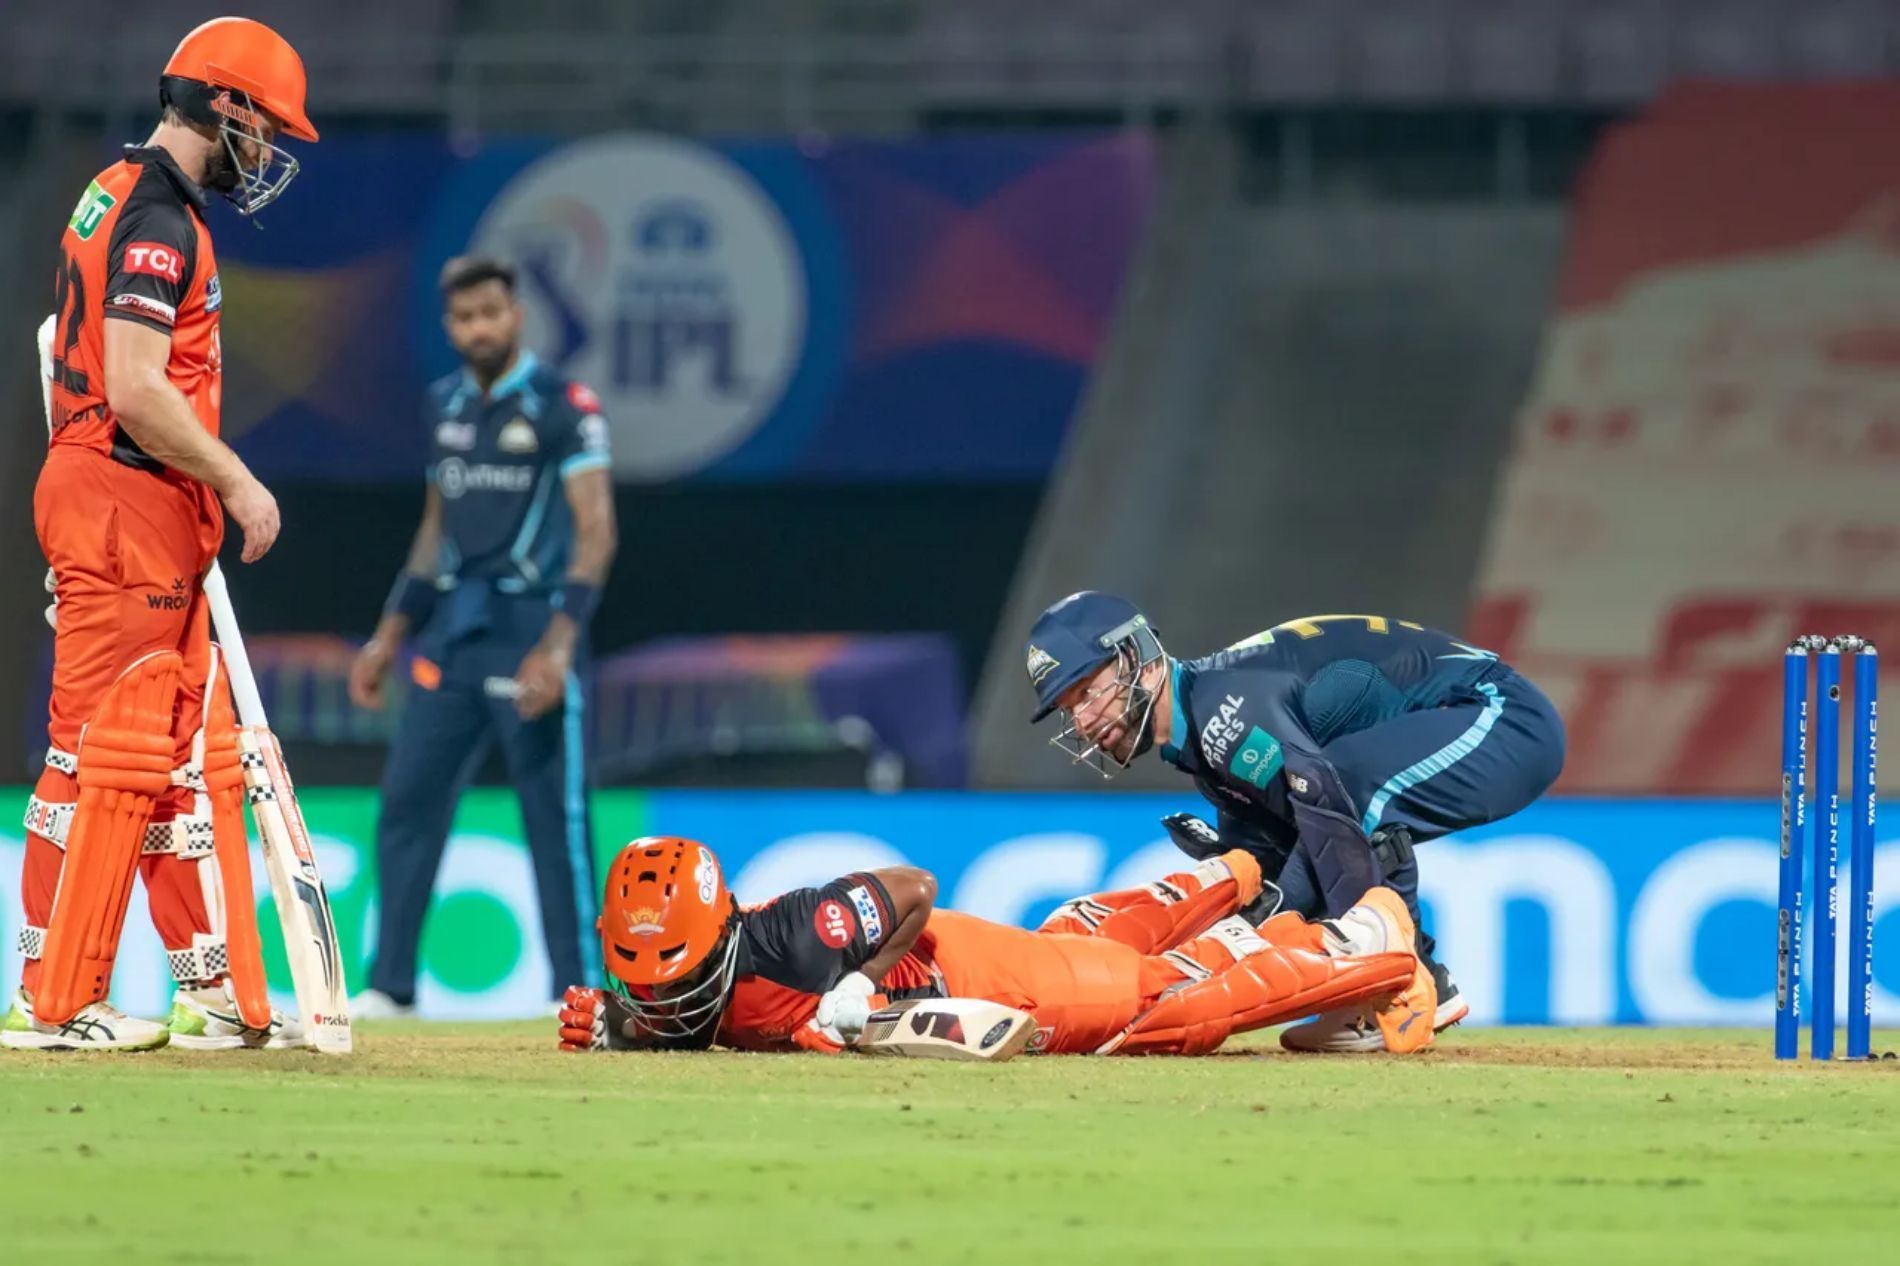 GT wicketkeeper Matthew Wade tries to help out SRH&rsquo;s Rahul Tripathi after the latter picked up an injury while batting in Match 21.